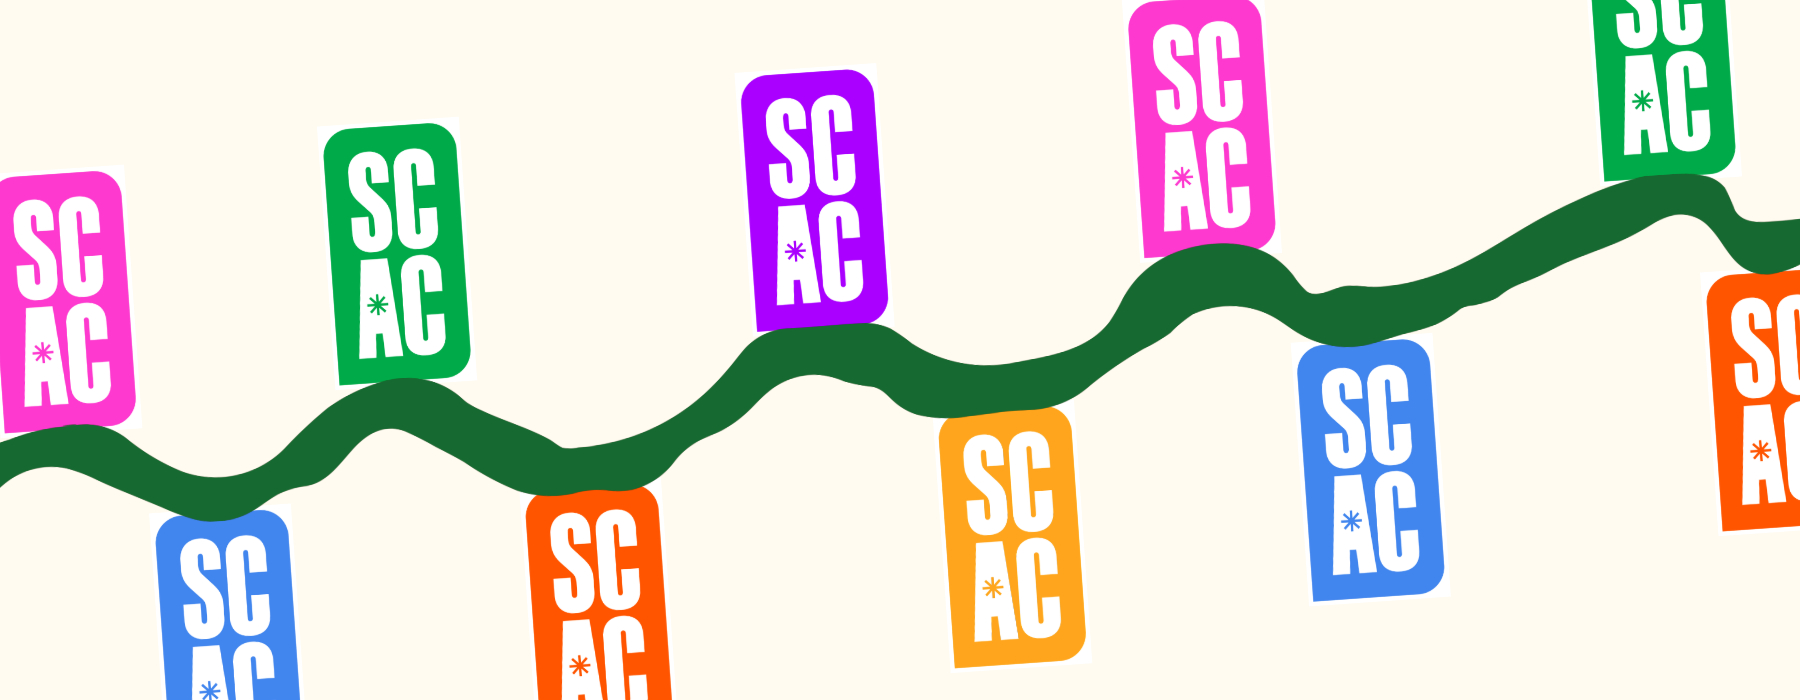 A playful decorative image of the SCAC acronym lockup in multiple colors along a wavy, dark green line to resemble a string of Christmas lights.